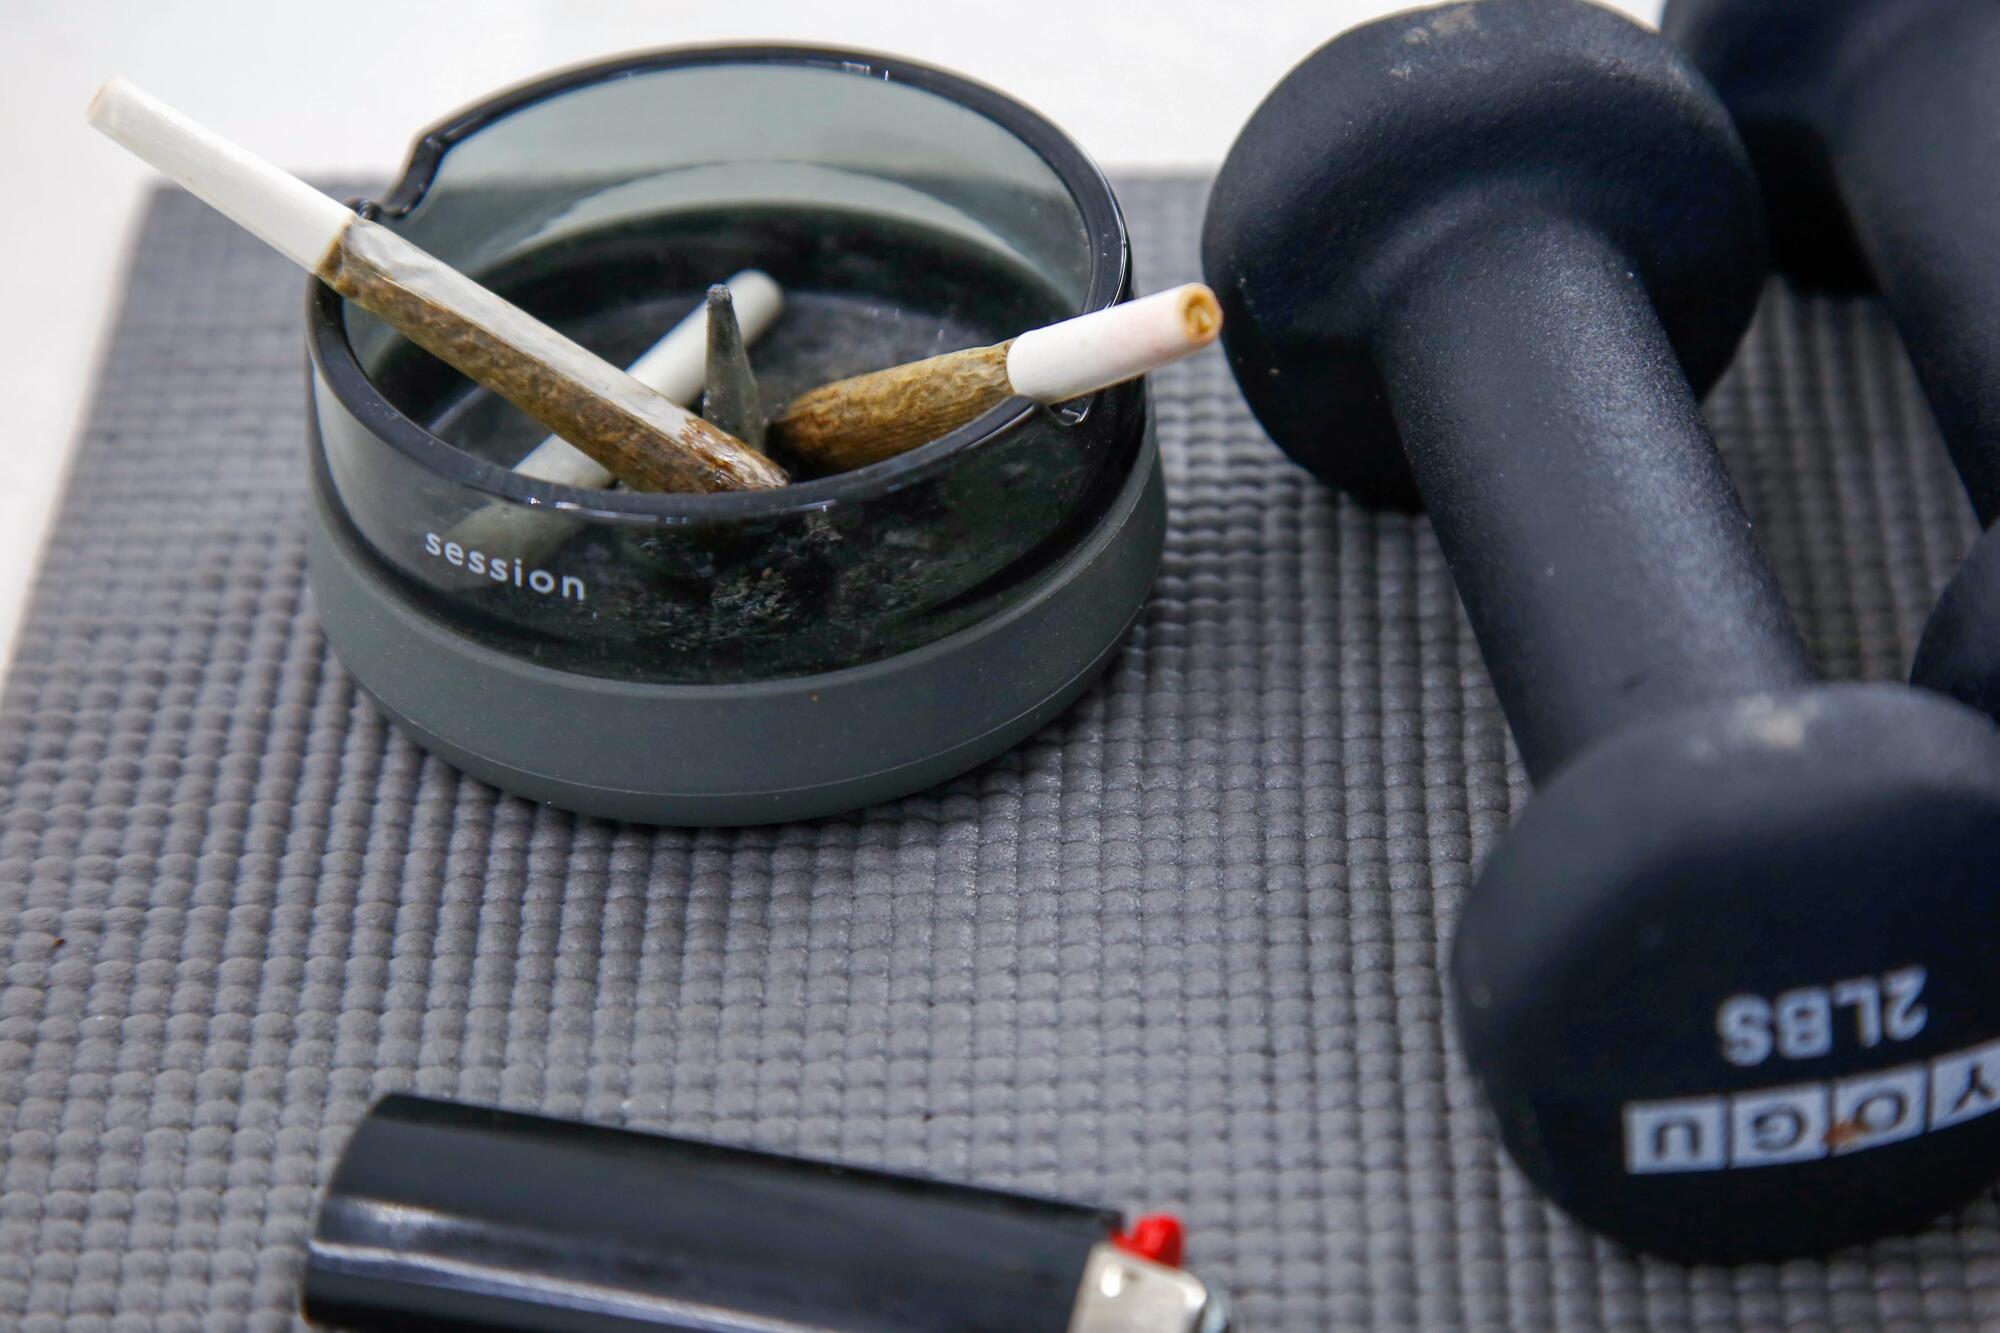 A pair of joints, hand weights and lighter are the required equipment for Stoned + Toned instructors.